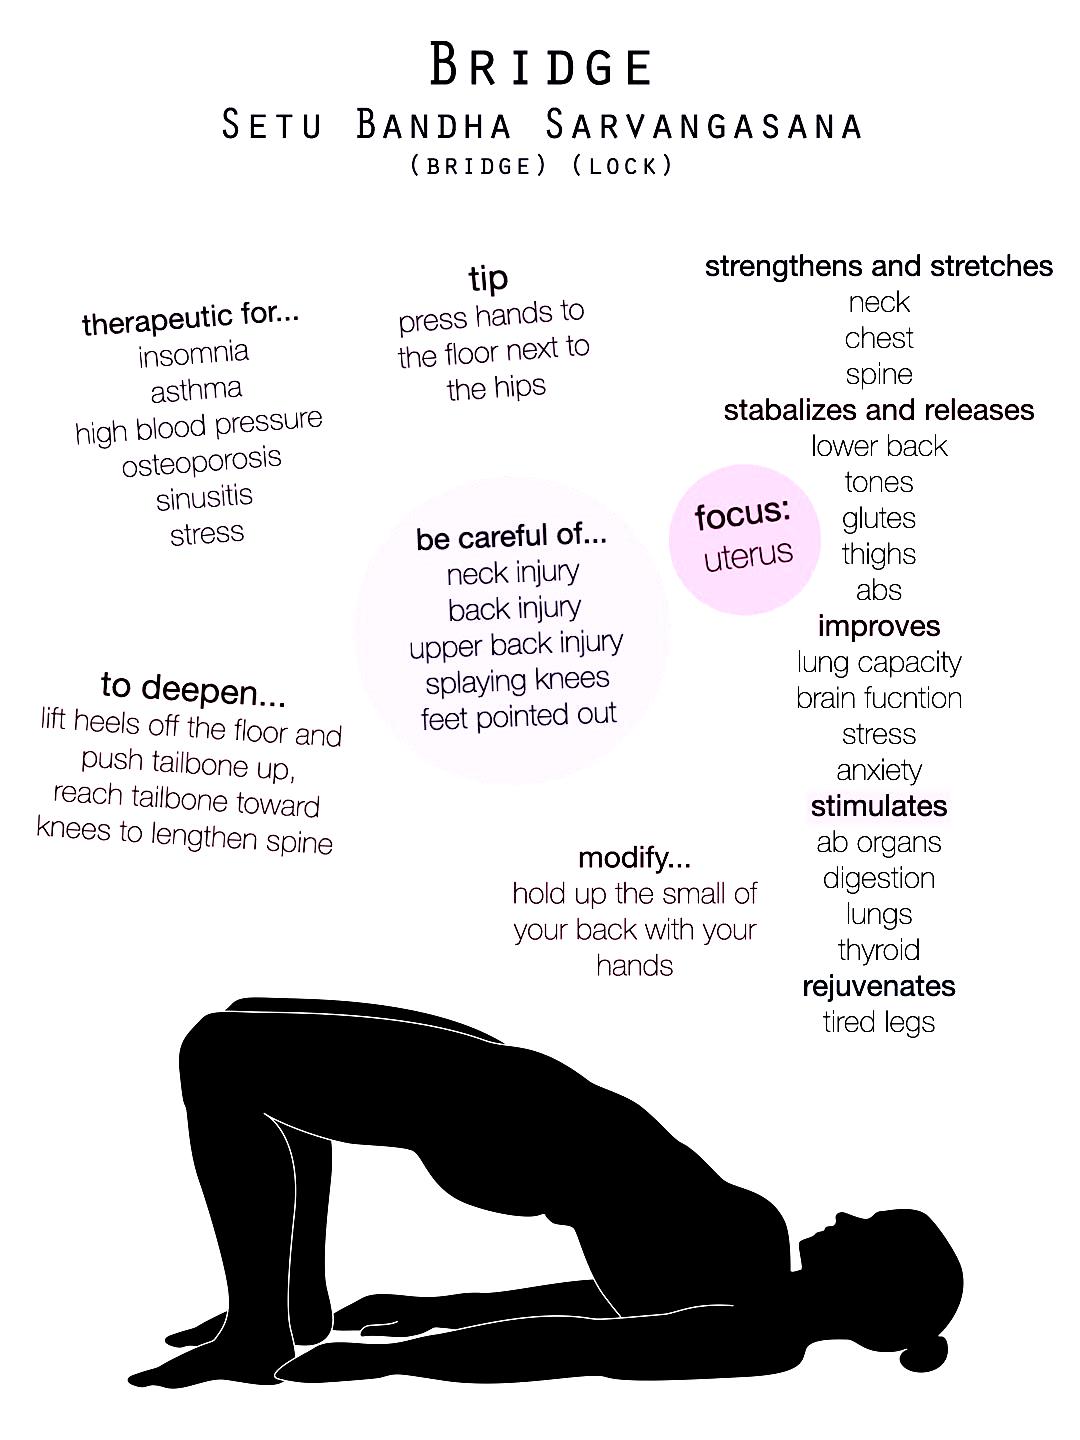 Asana Yoga Poses Benefits - Work Out Picture Media - Work Out Picture Media